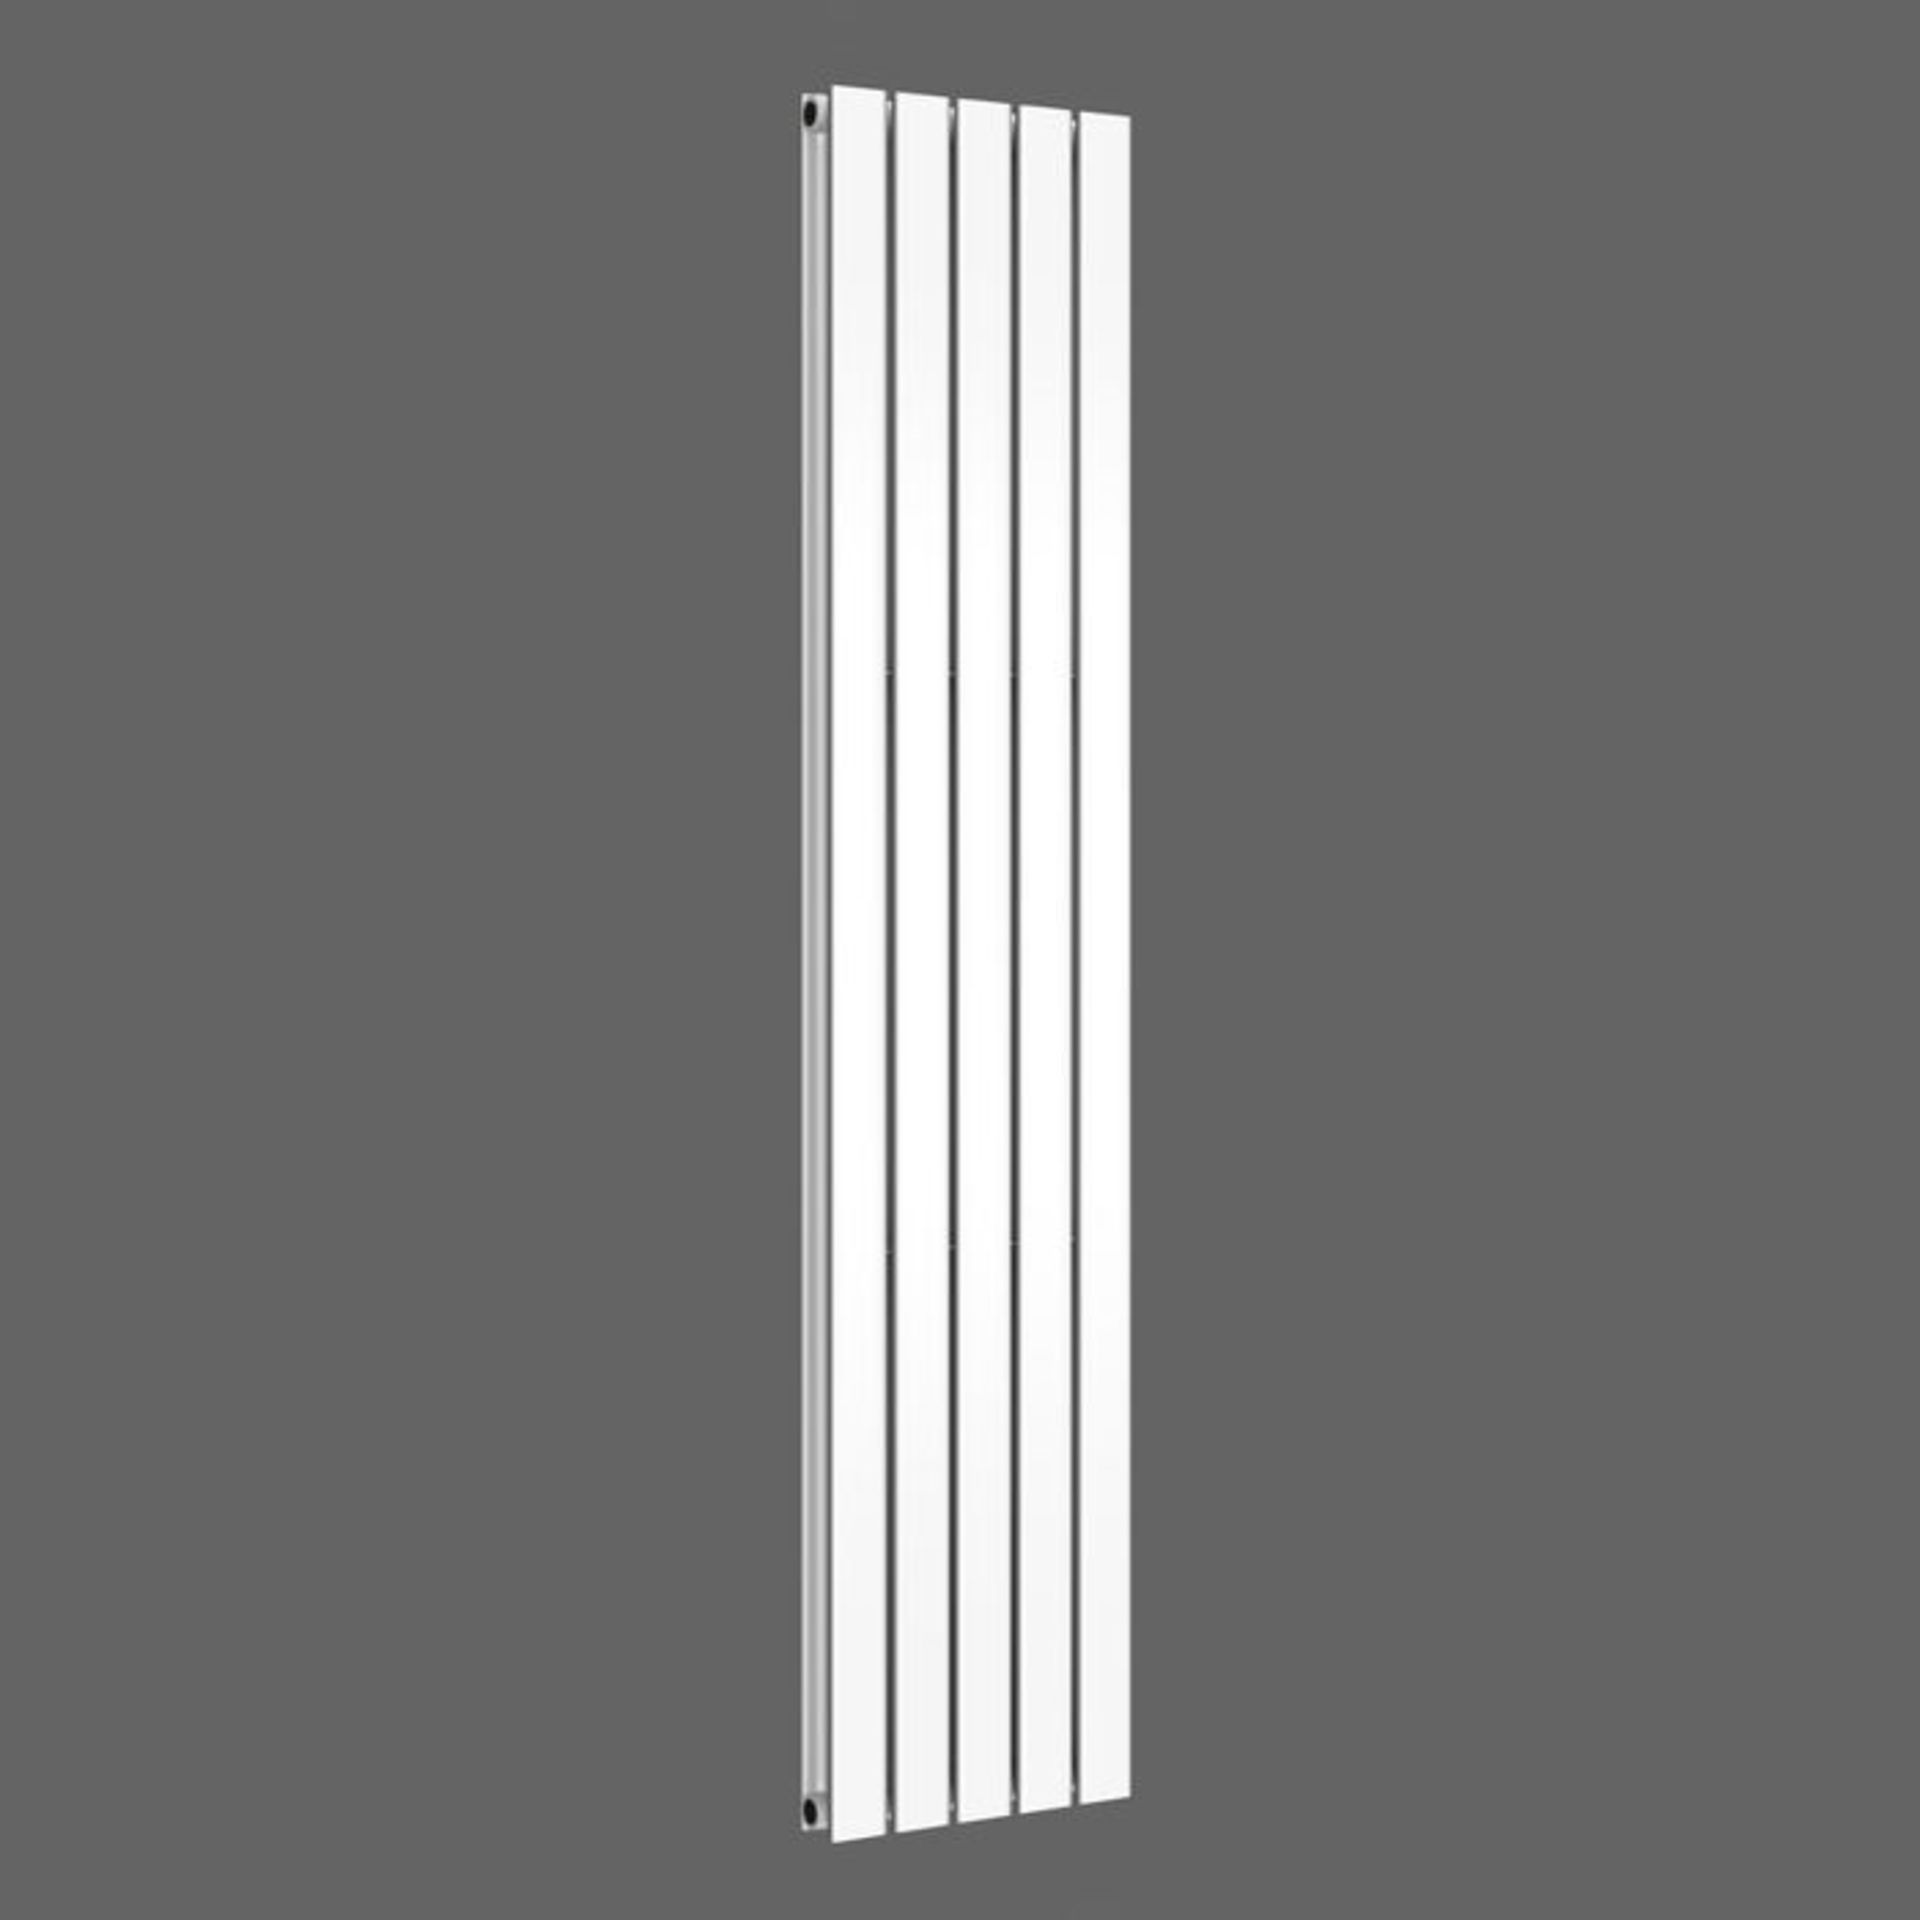 1800x376mm Gloss White Double Flat Panel Vertical Radiator. RRP £429.97. Made with low carbon ... - Image 3 of 3